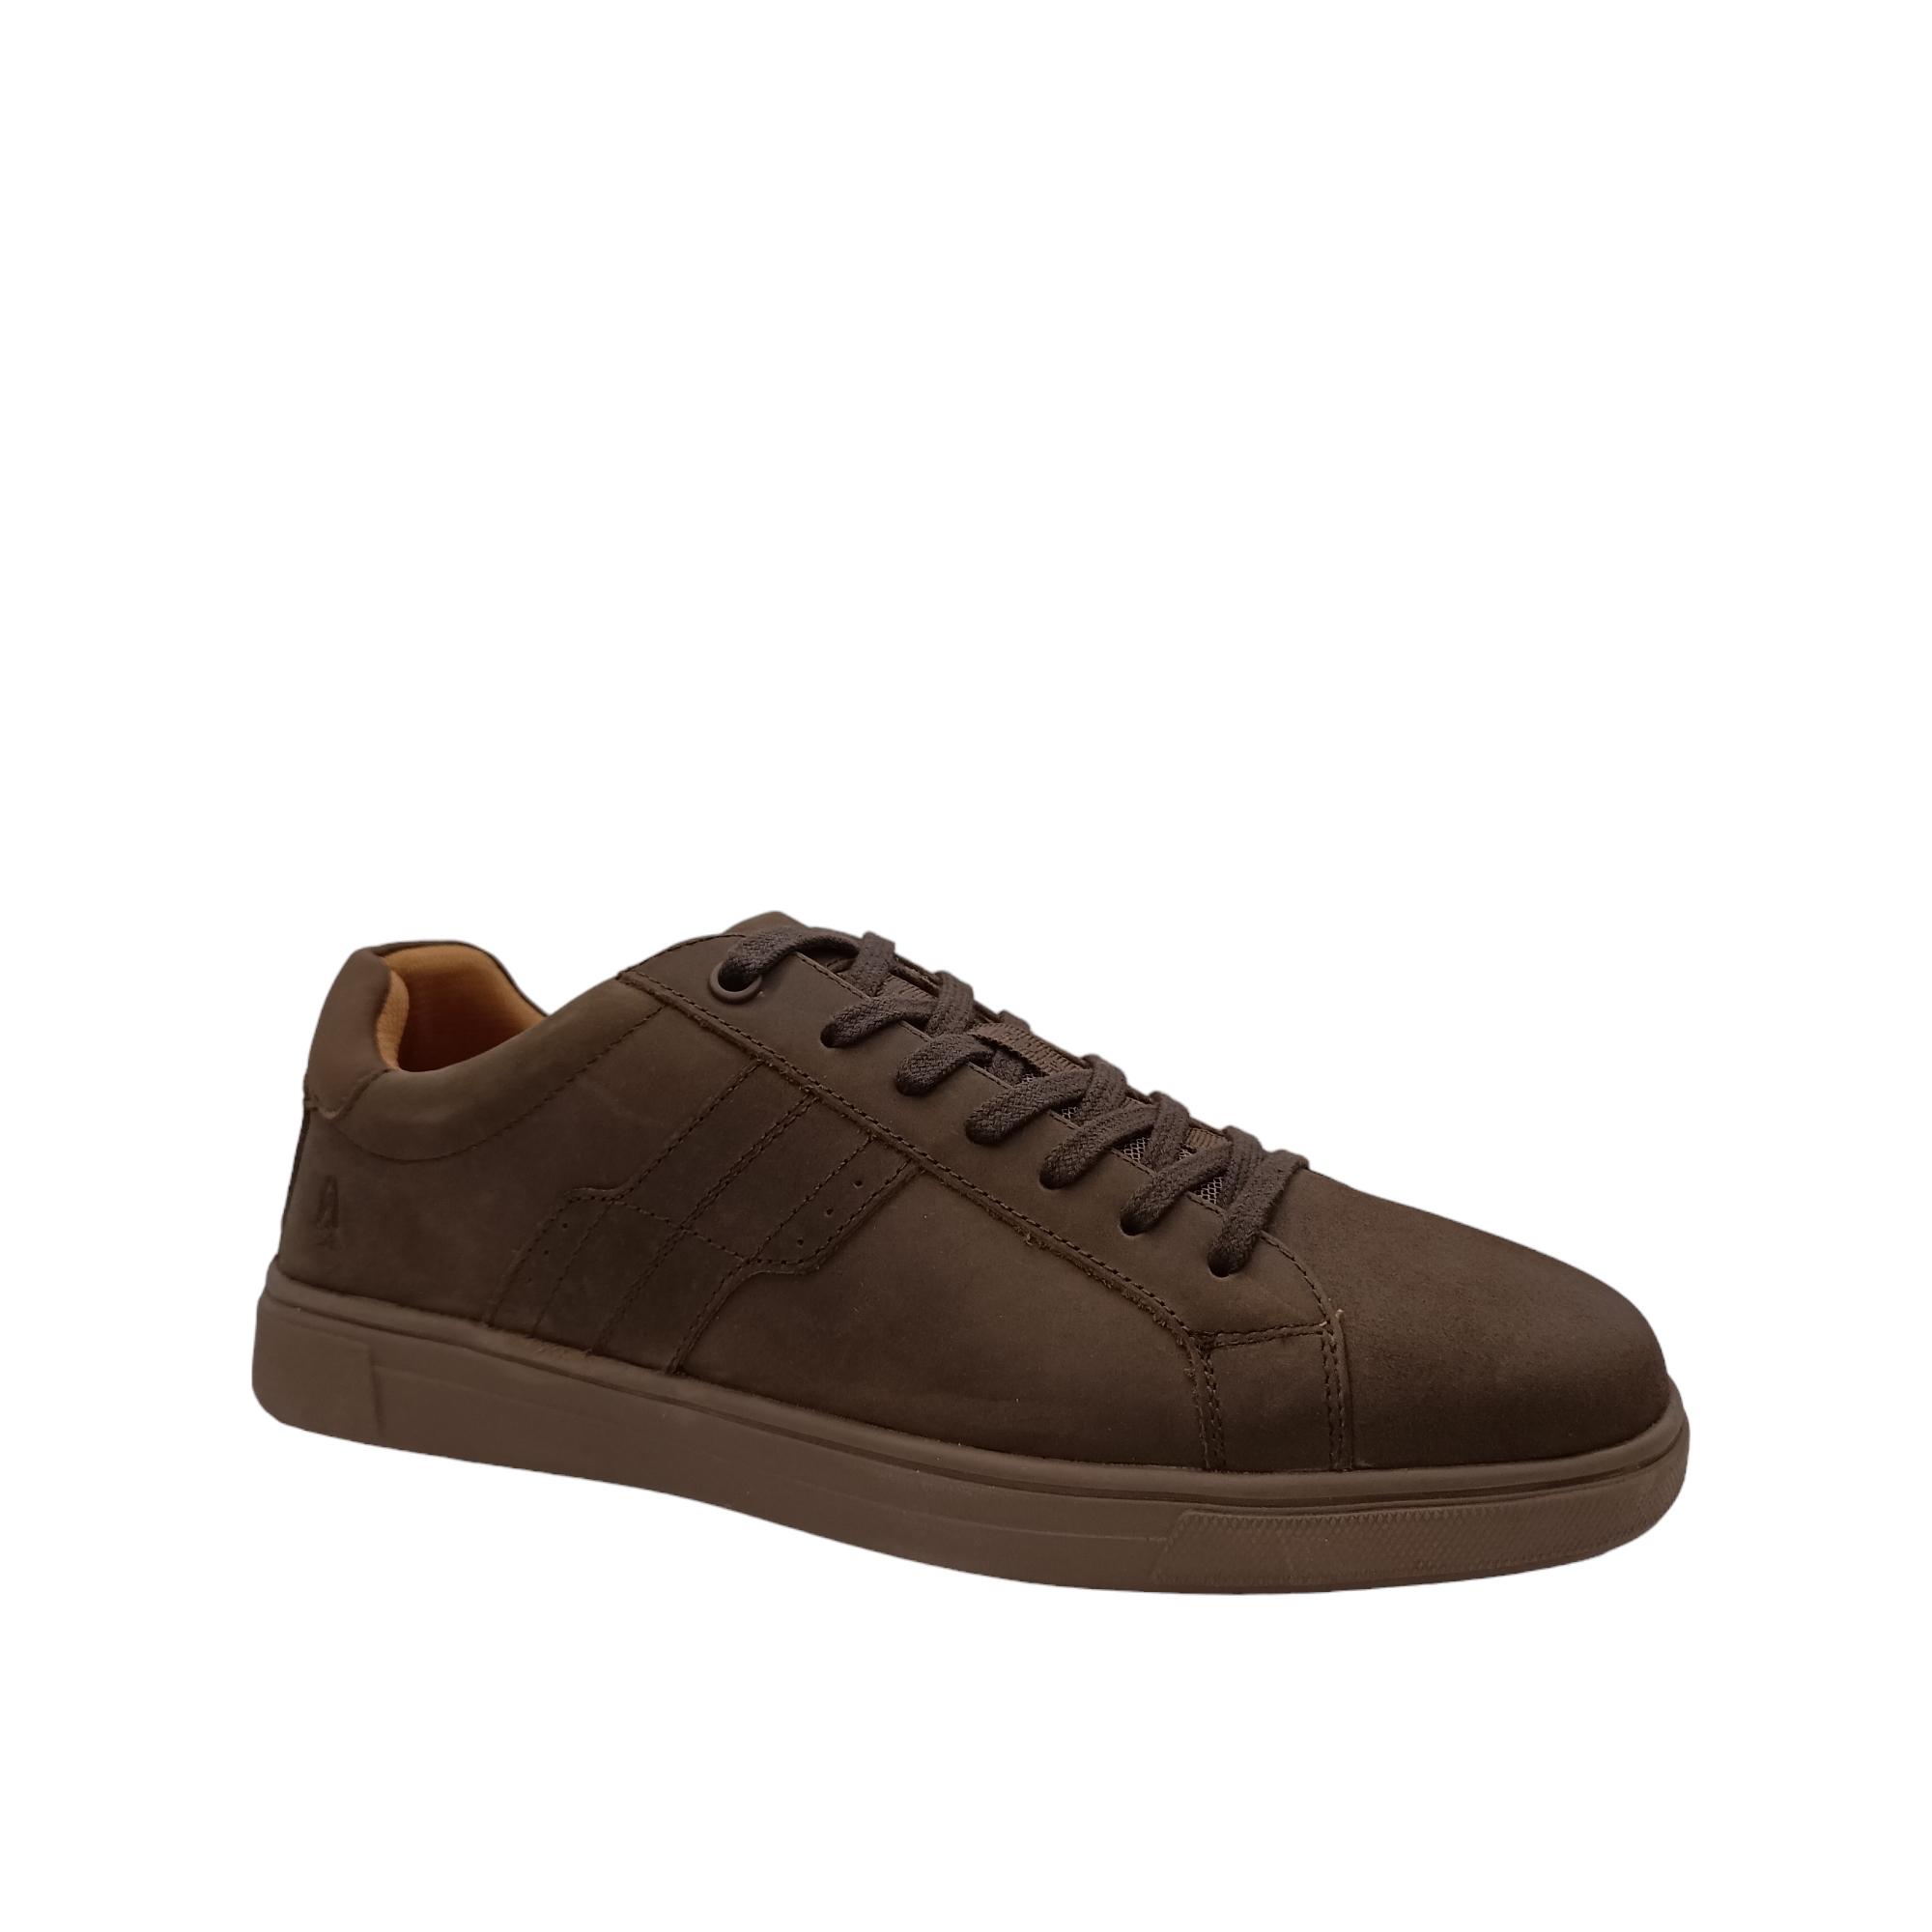 Gravity Leather from Hush Puppies. side angled view of brown oiled leather lace up shoe with dark brown flat laces. Lightening pattern from laces down to dark brown sole. Shop Online and In-store with shoe&me Mount Maunganui